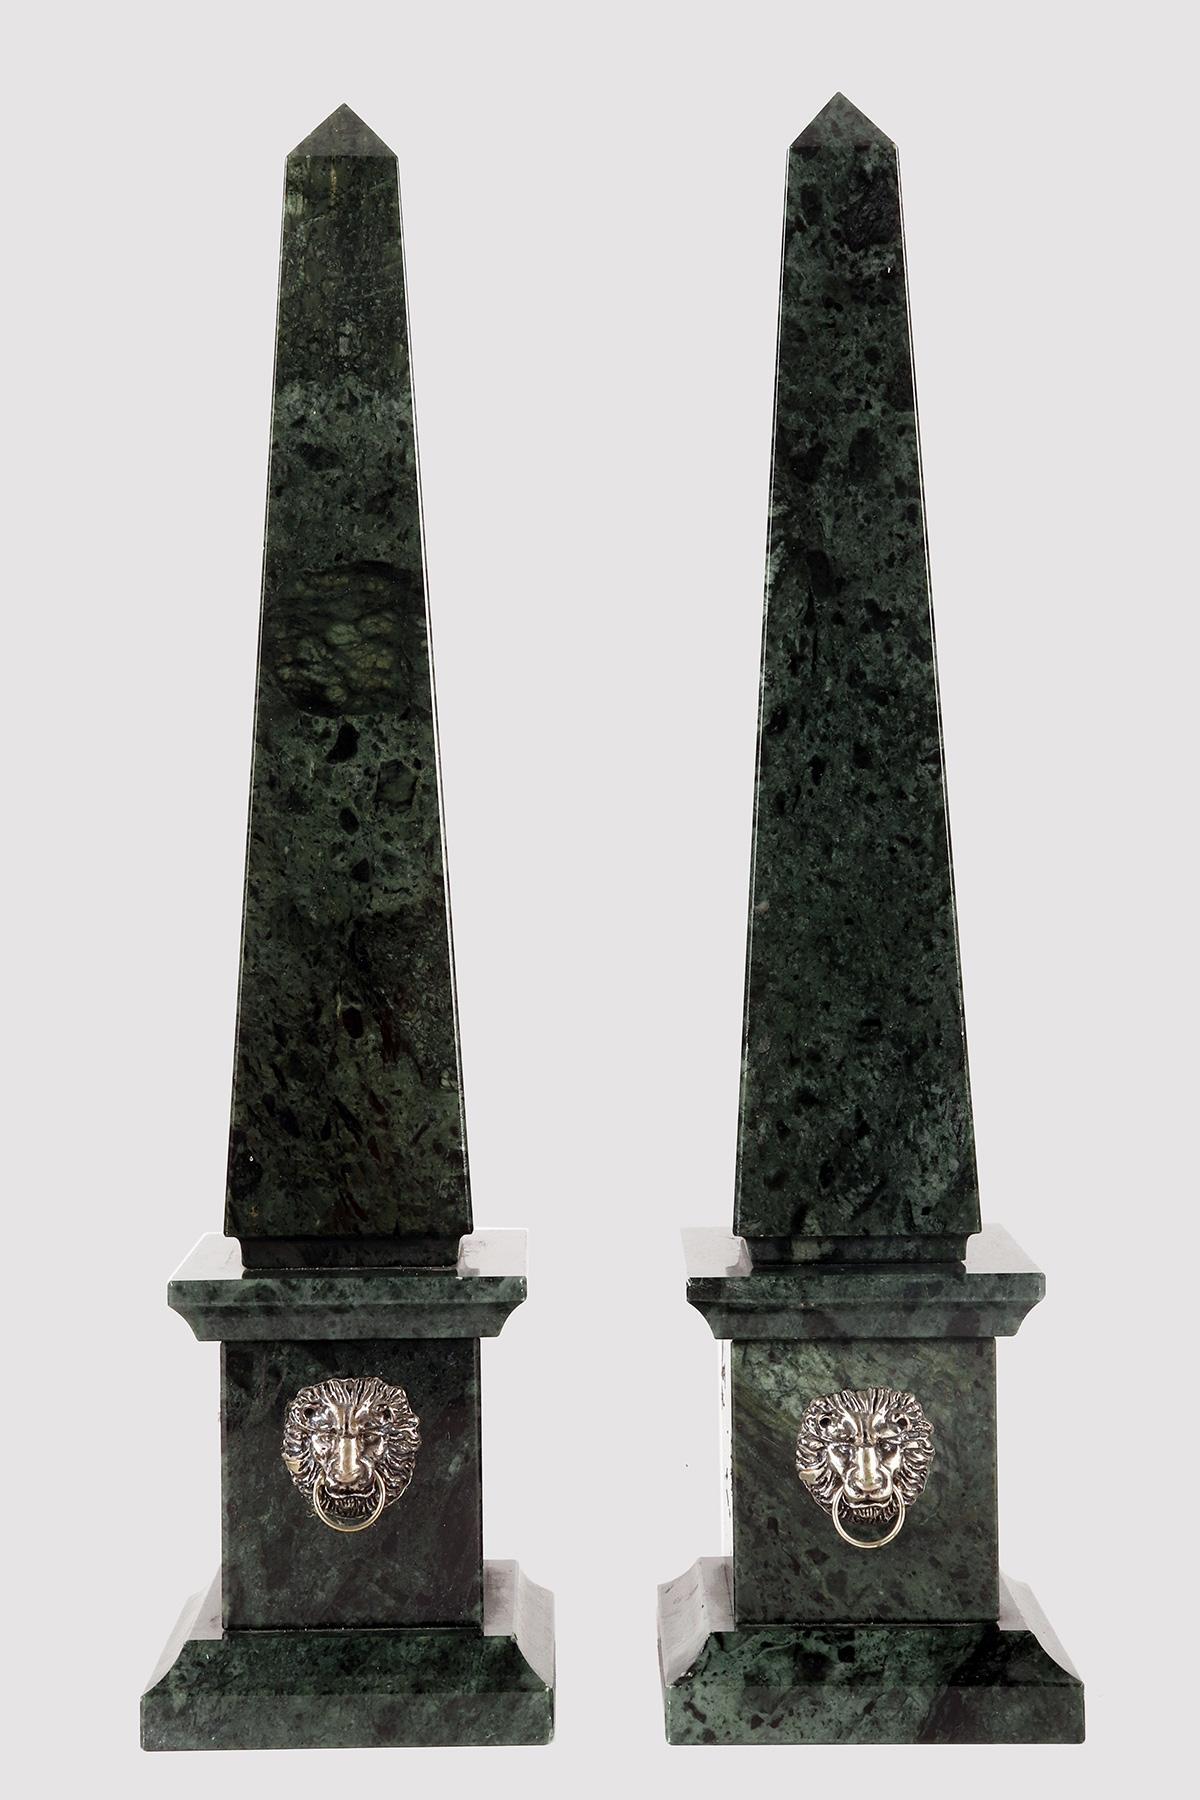 A pair of Grand Tour obelisks. Made of Green Alps marble. On the front side of the plinth, there is a bezel with a silver mask depicting the head of a lion. Italy second half of the 19th century.